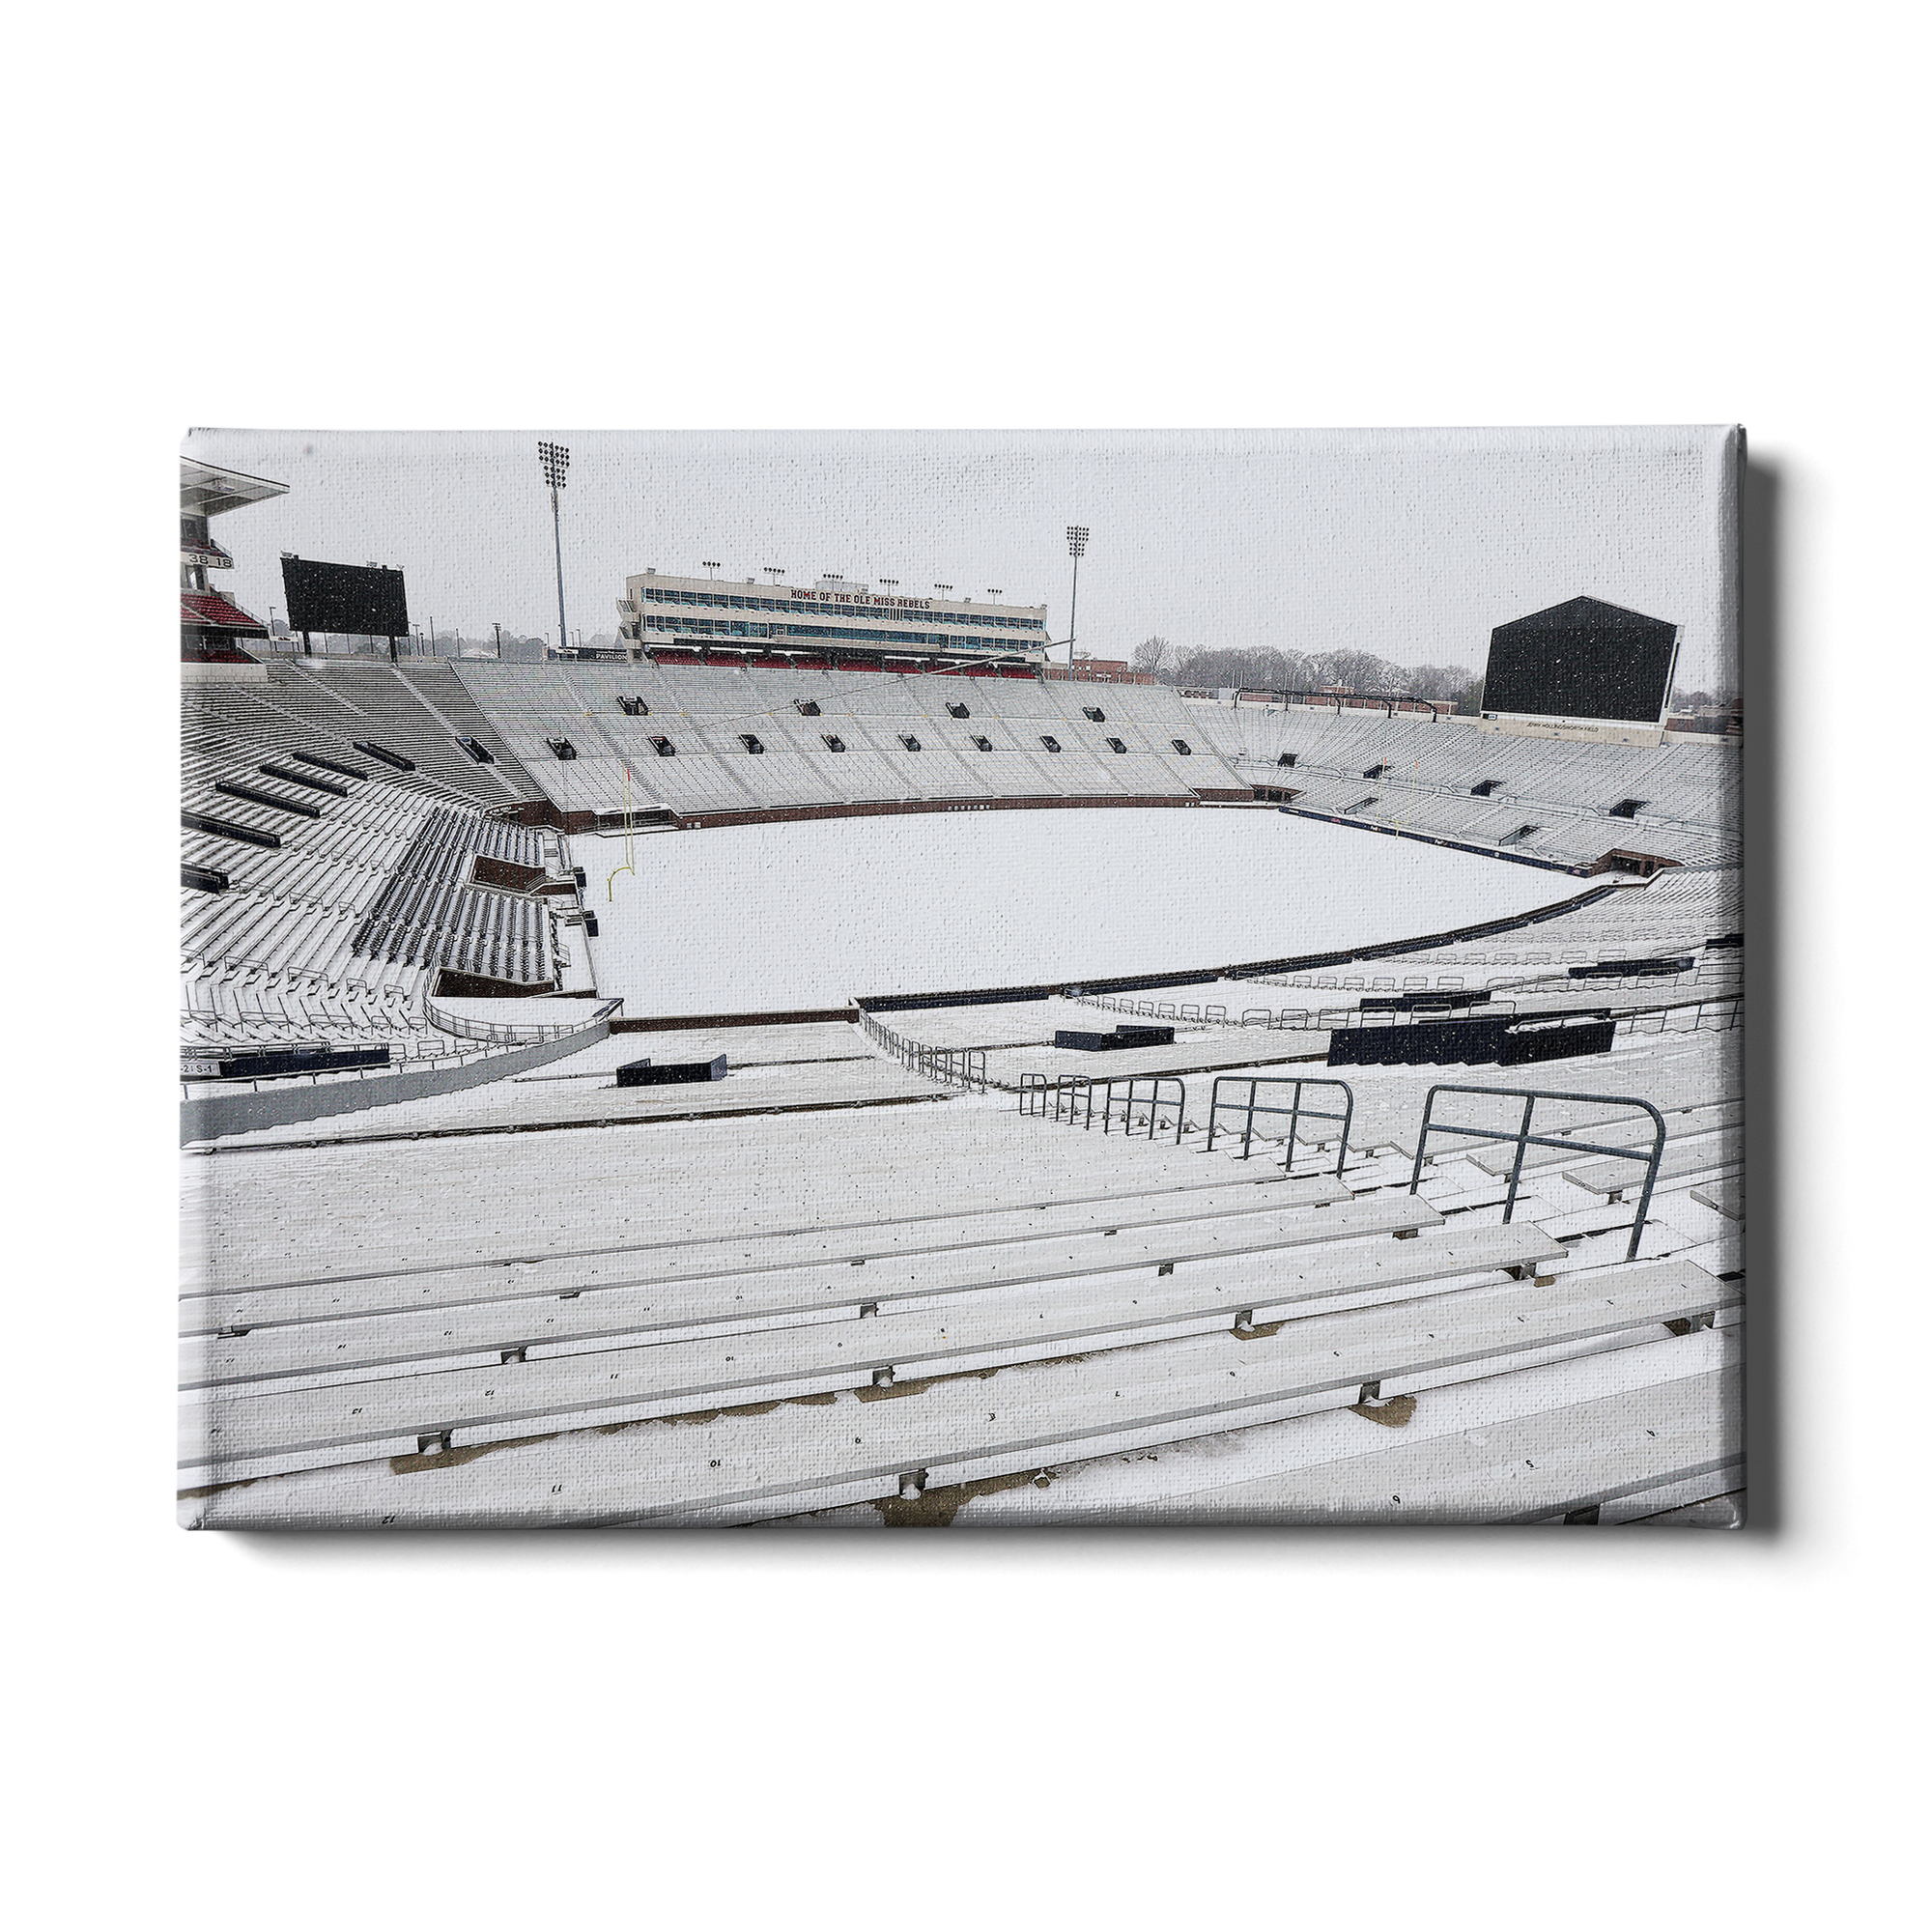 Ole Miss Rebels - Snow Day-Vaught- Hemingway - College Wall Art #Canvas